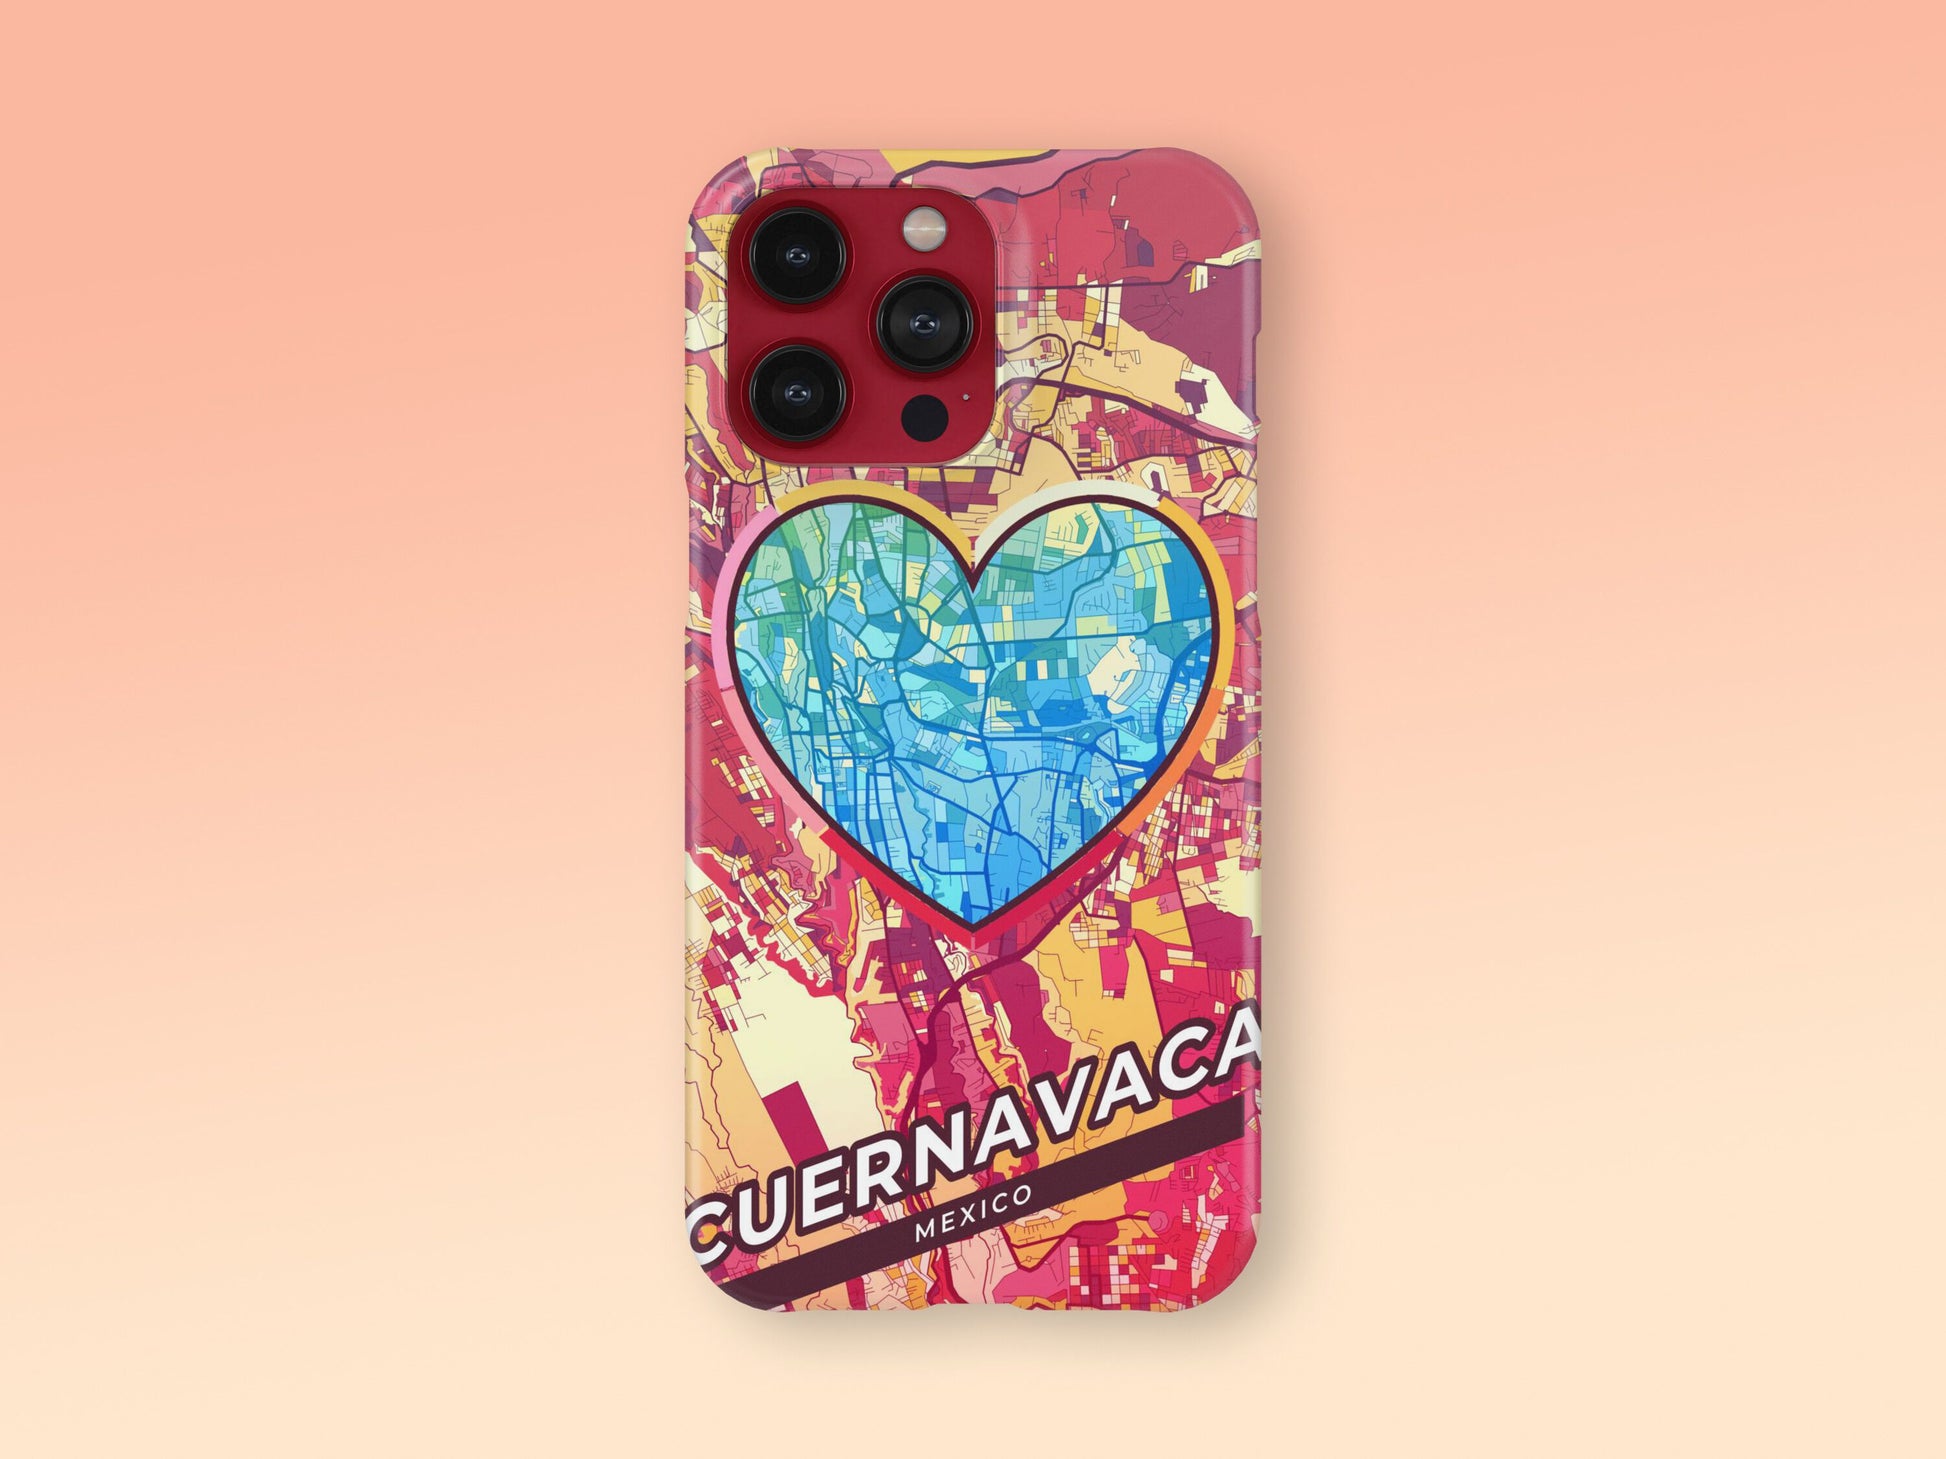 Cuernavaca Mexico slim phone case with colorful icon. Birthday, wedding or housewarming gift. Couple match cases. 2